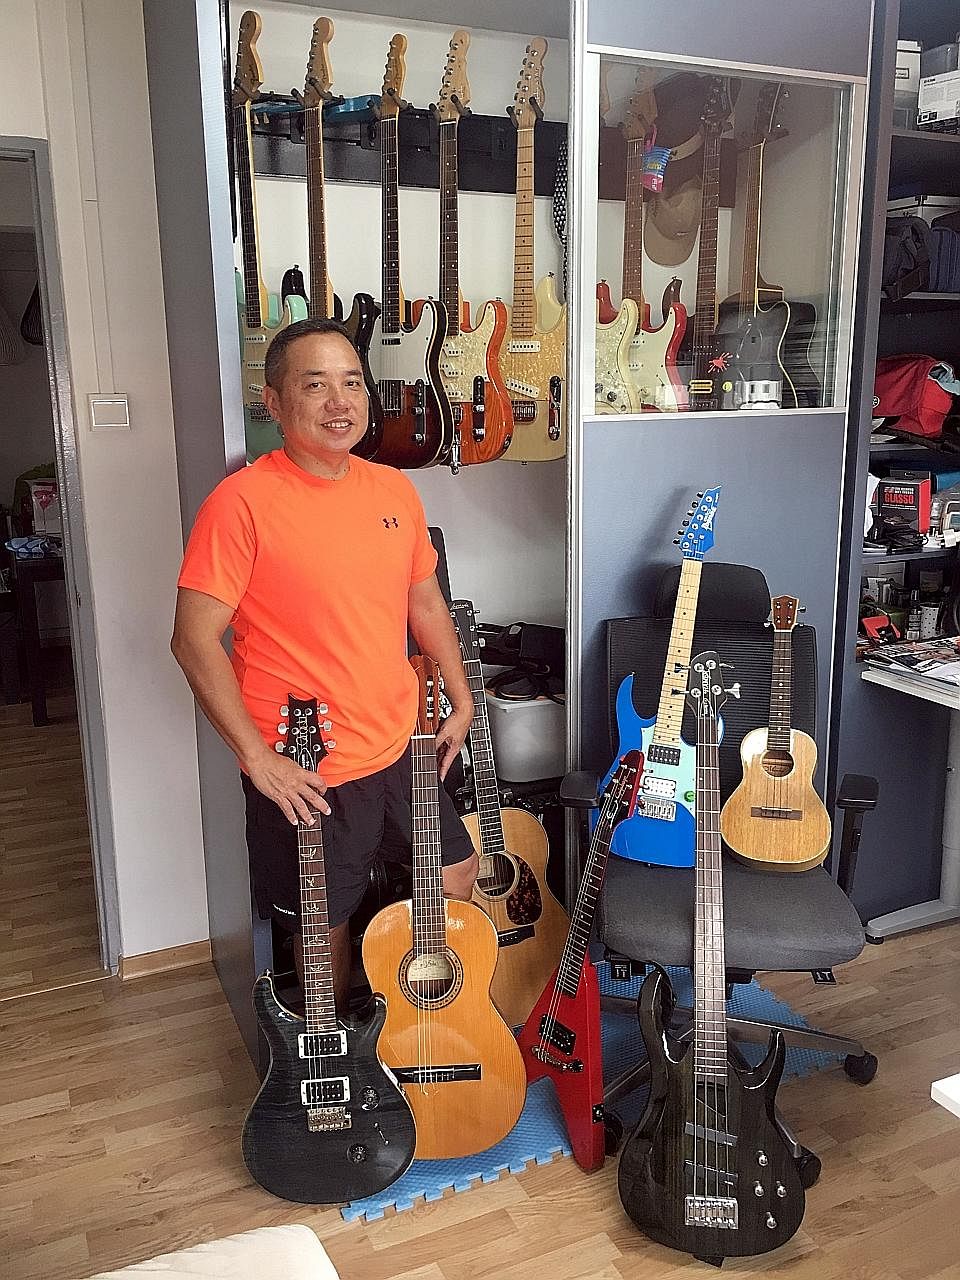 Mr Sim Hong Huat with his collection of 20 stringed instruments, mainly guitars (above), and playing at Eusoff Hall during his university days (left).